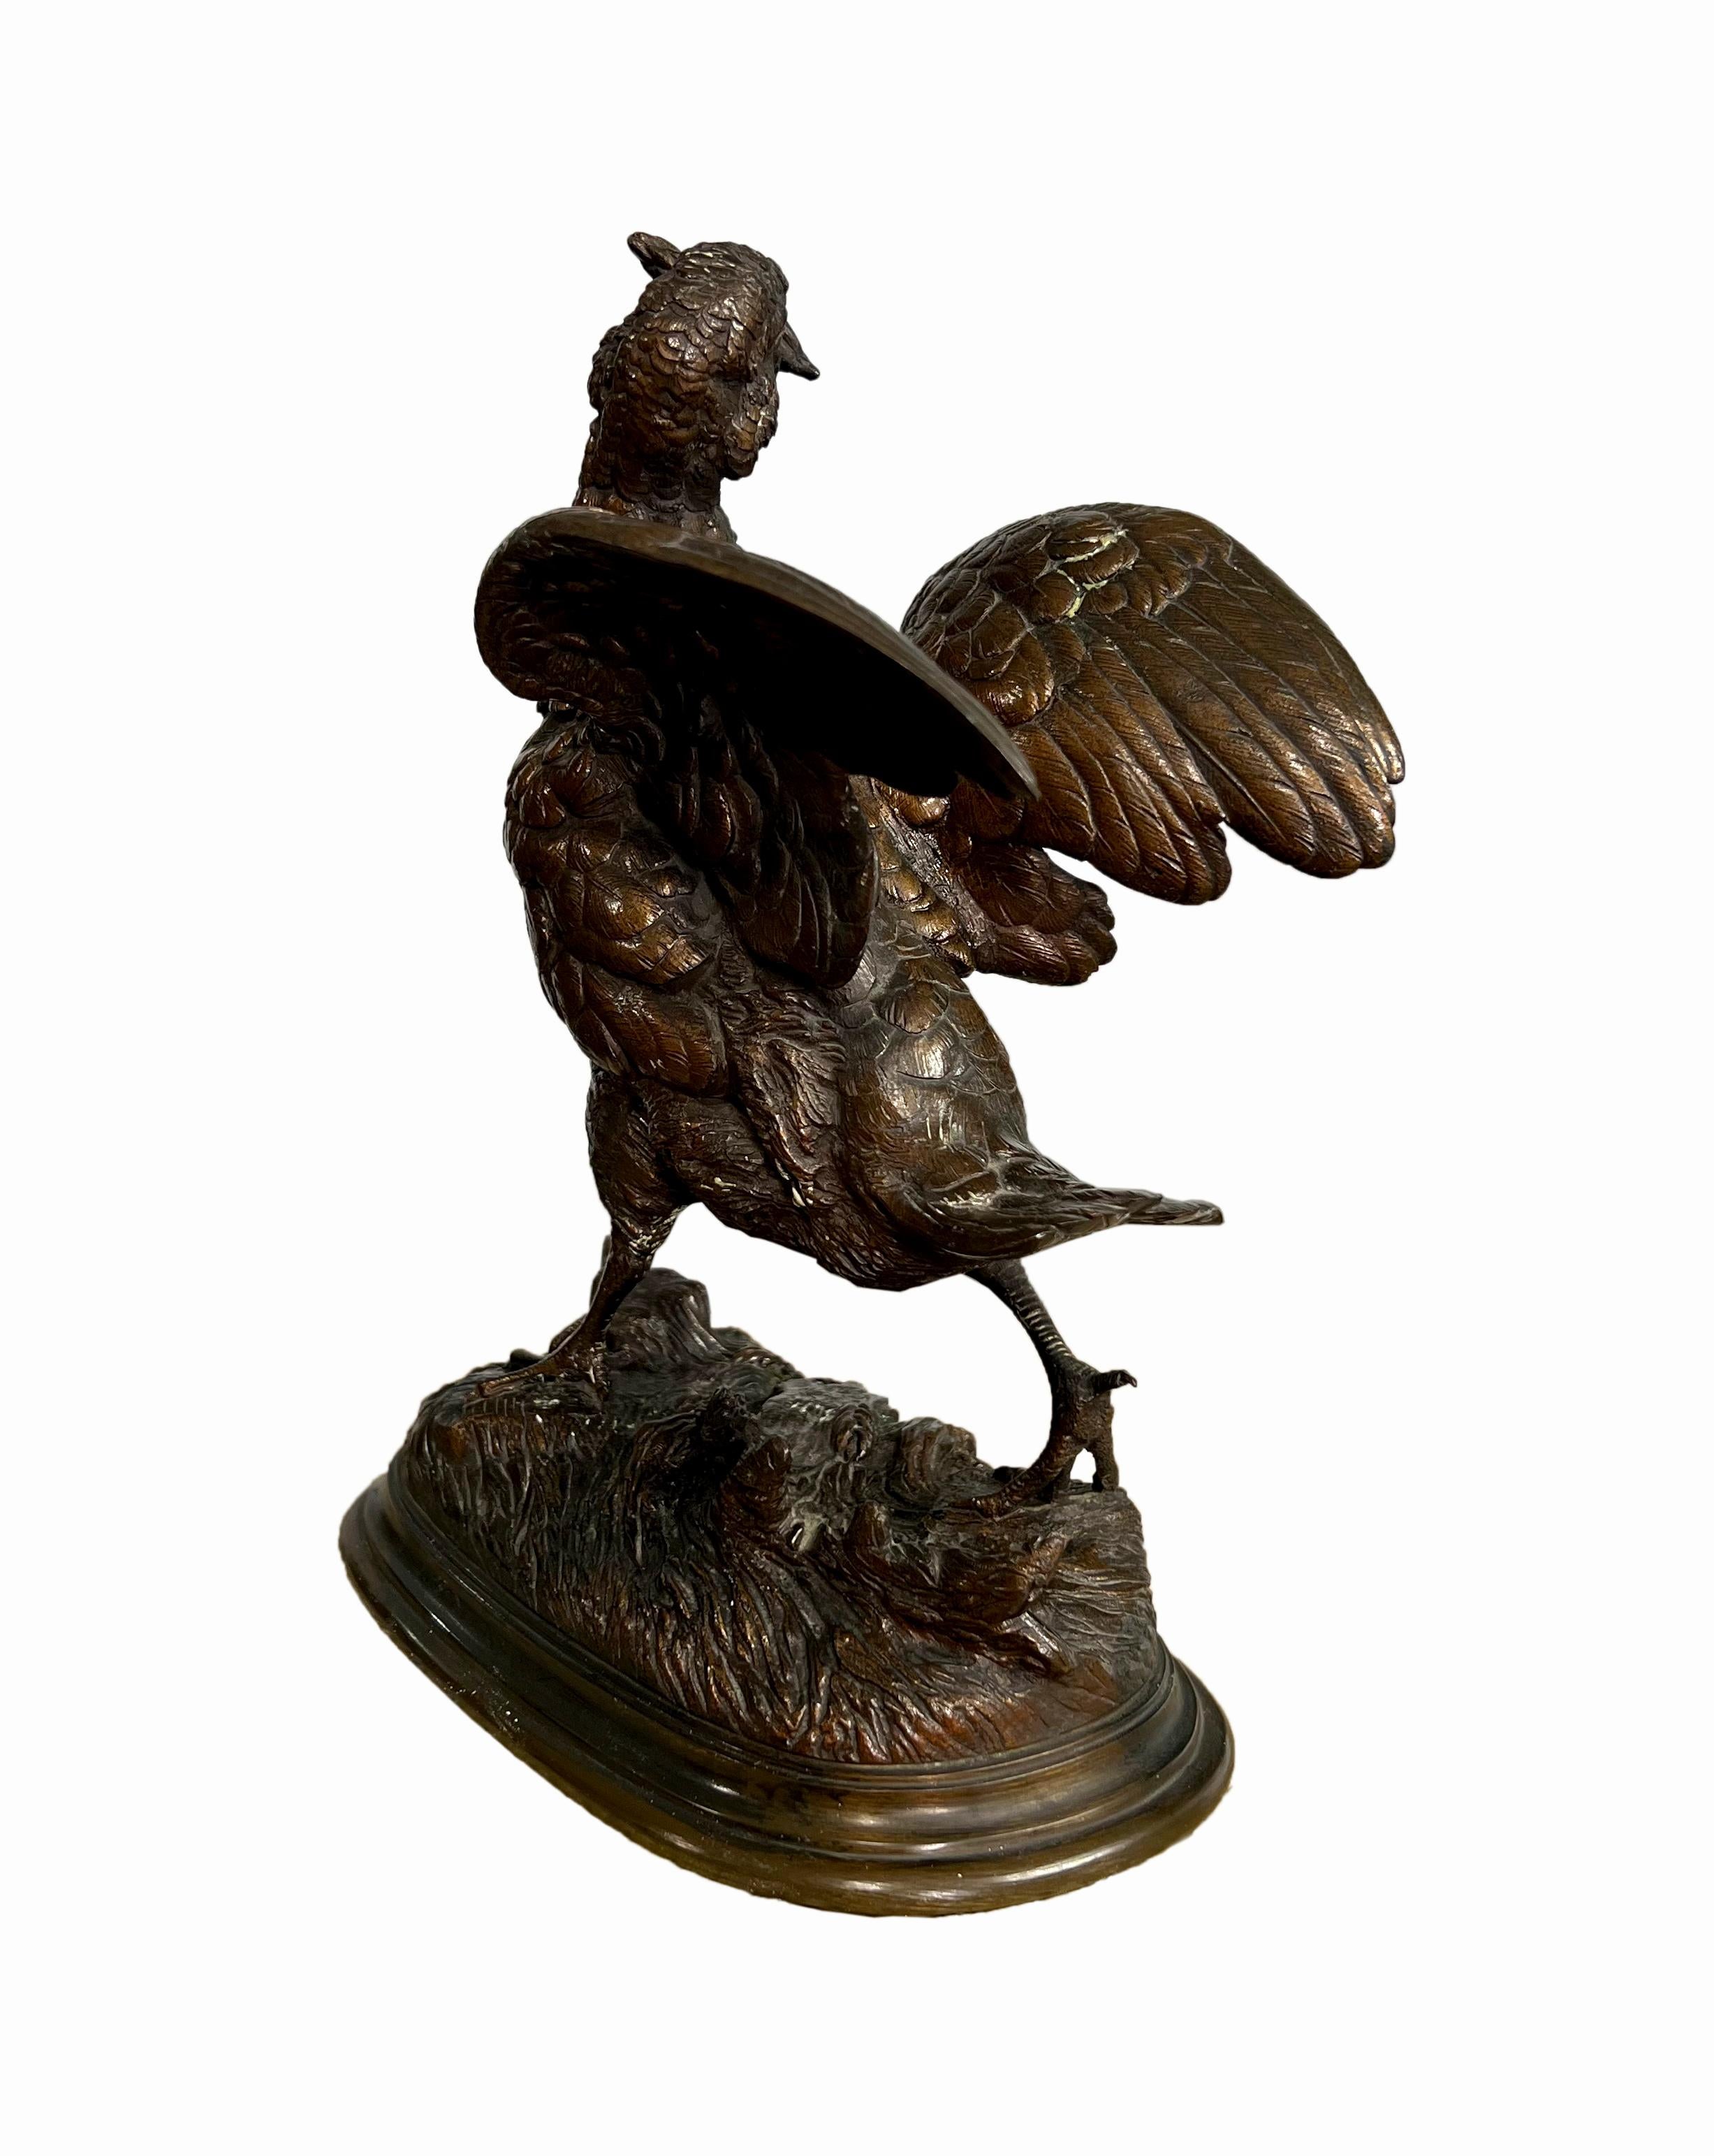 A French patinated bronze sculpture of a grouse with wings spread, carrying a sheaf of wheat in its beak, raised on oval base, after a model by Alfred Barye (1839-1882)
Incised: BARYE.

Height